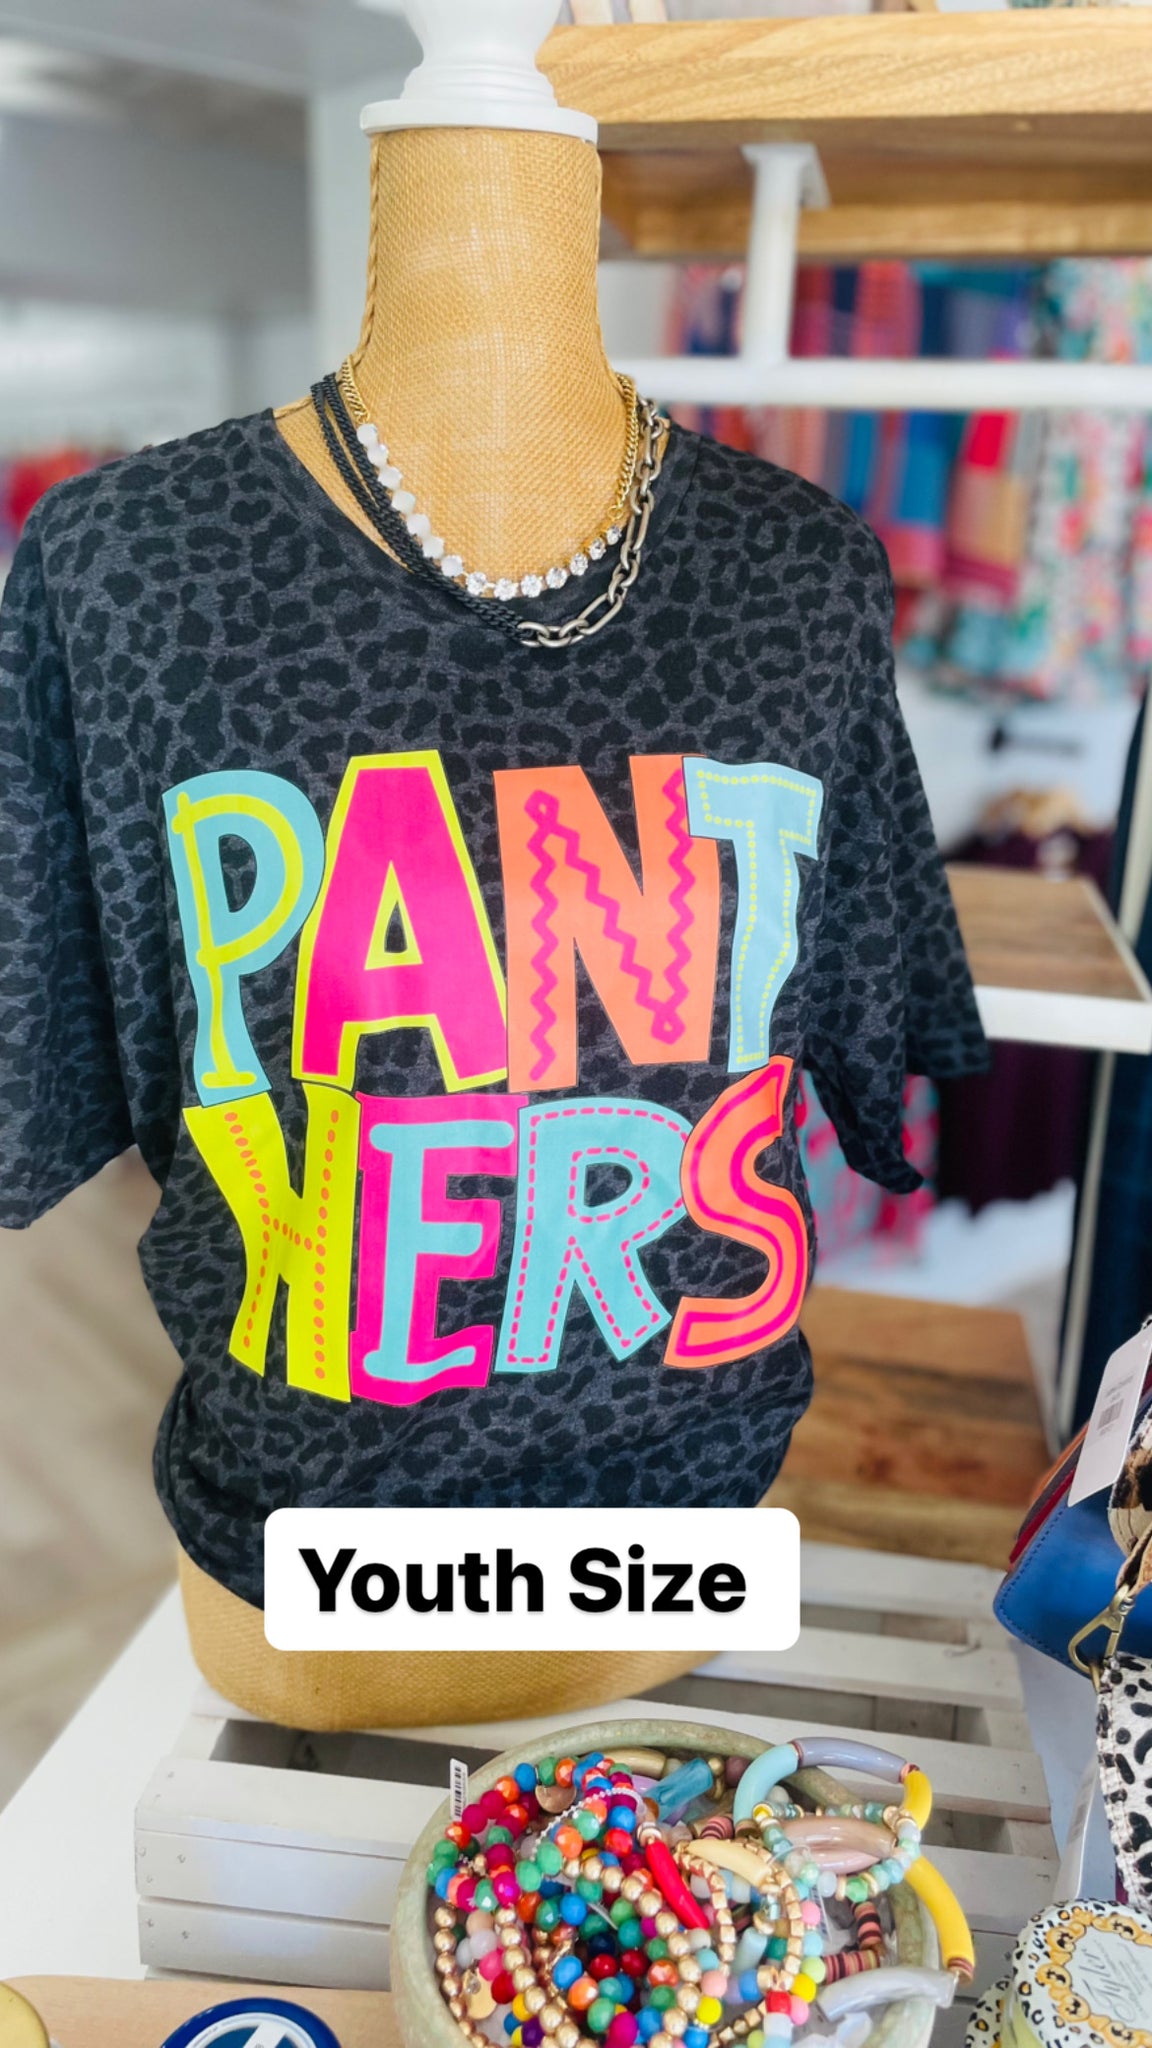 Panthers Pride-Youth